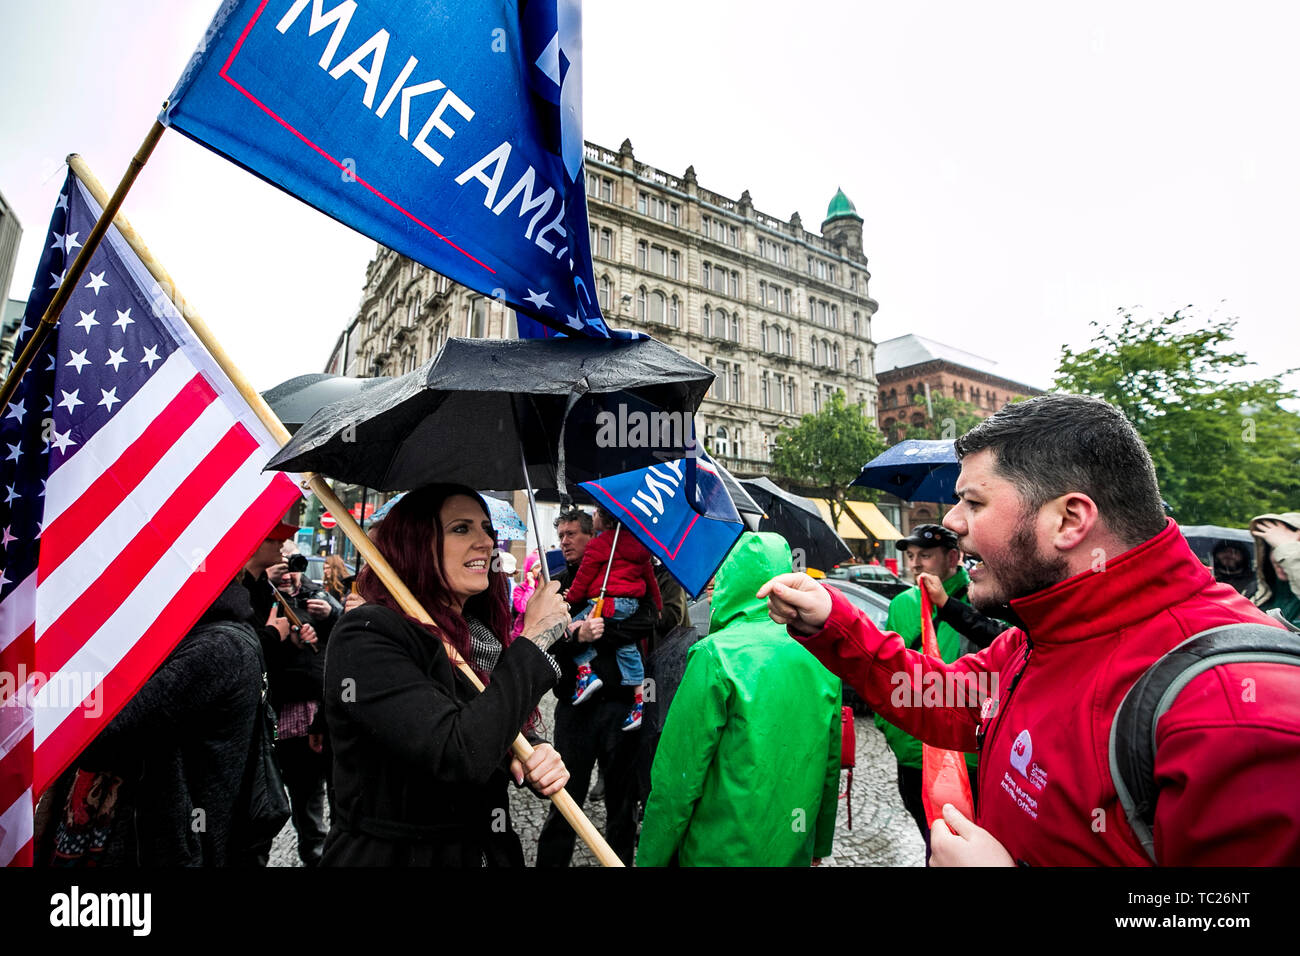 Jayda Fransen (left) former deputy leader of Britain First, in a heated discussion as she stages a corner protest with supporters at a 'Stop Trumpism' rally hosted by ExAct: Expat Action Group NI, at Belfast City Hall. Stock Photo